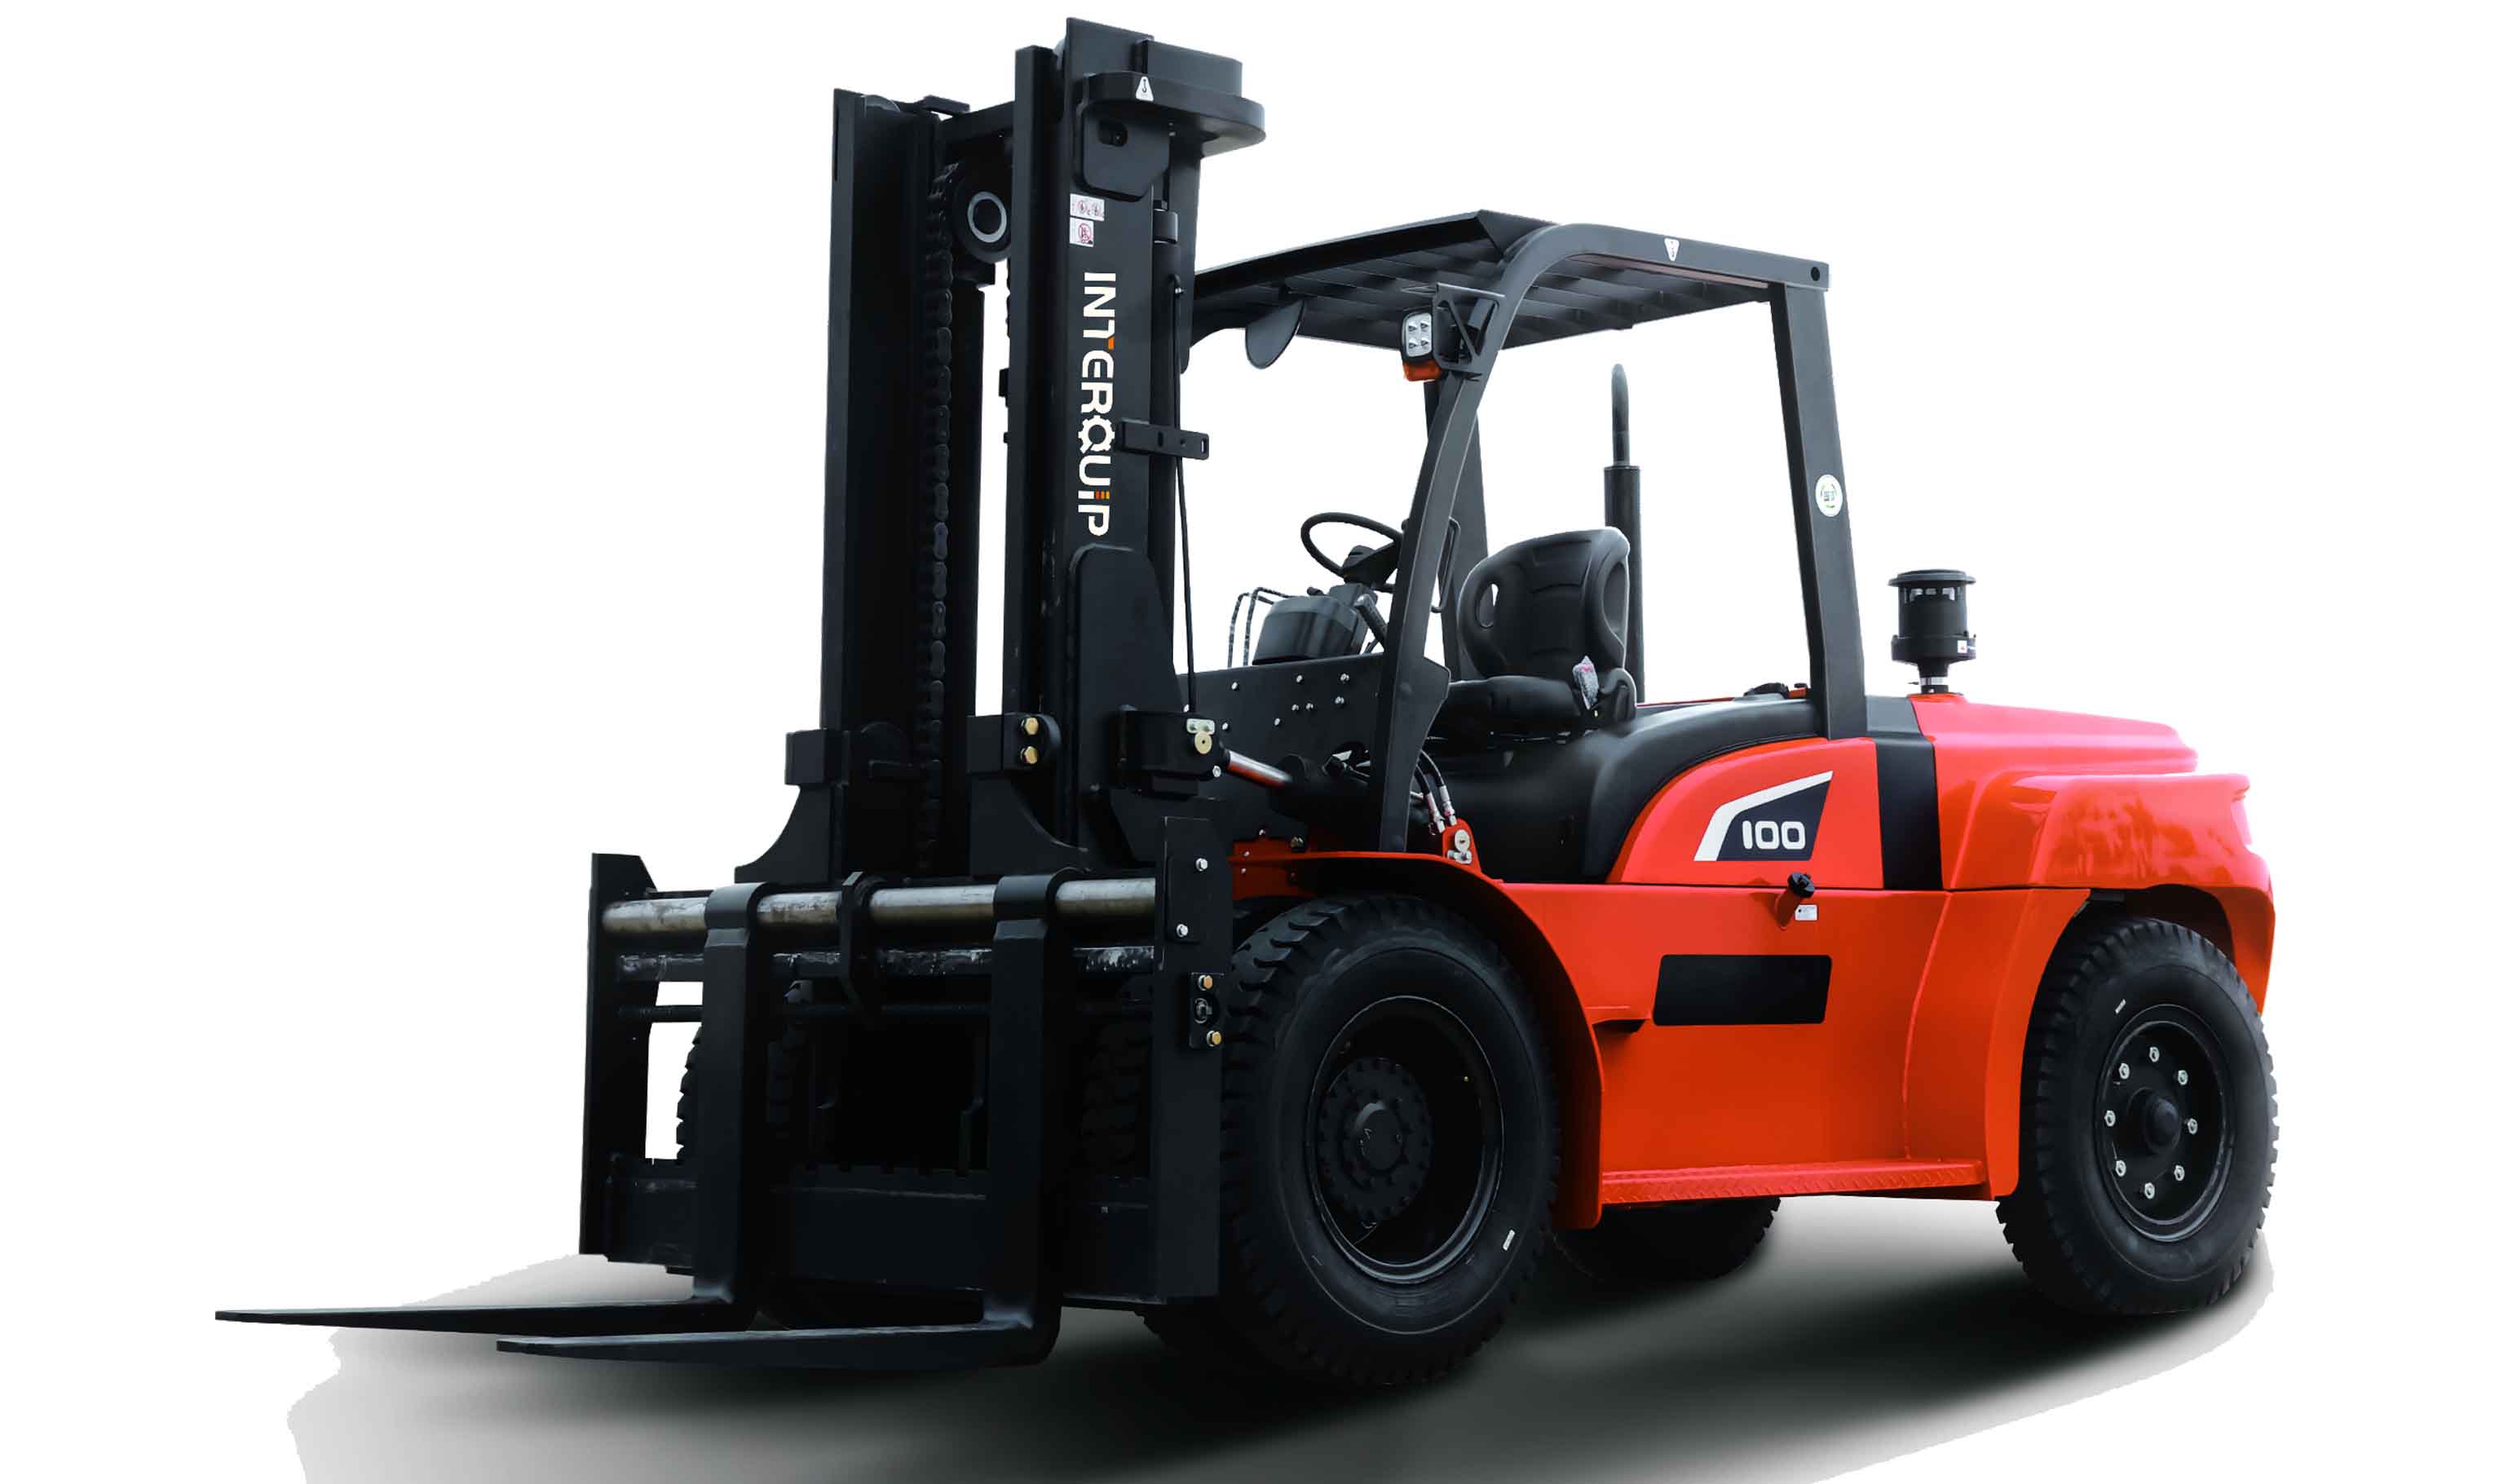 How to adjust the height of forklift forks and masts